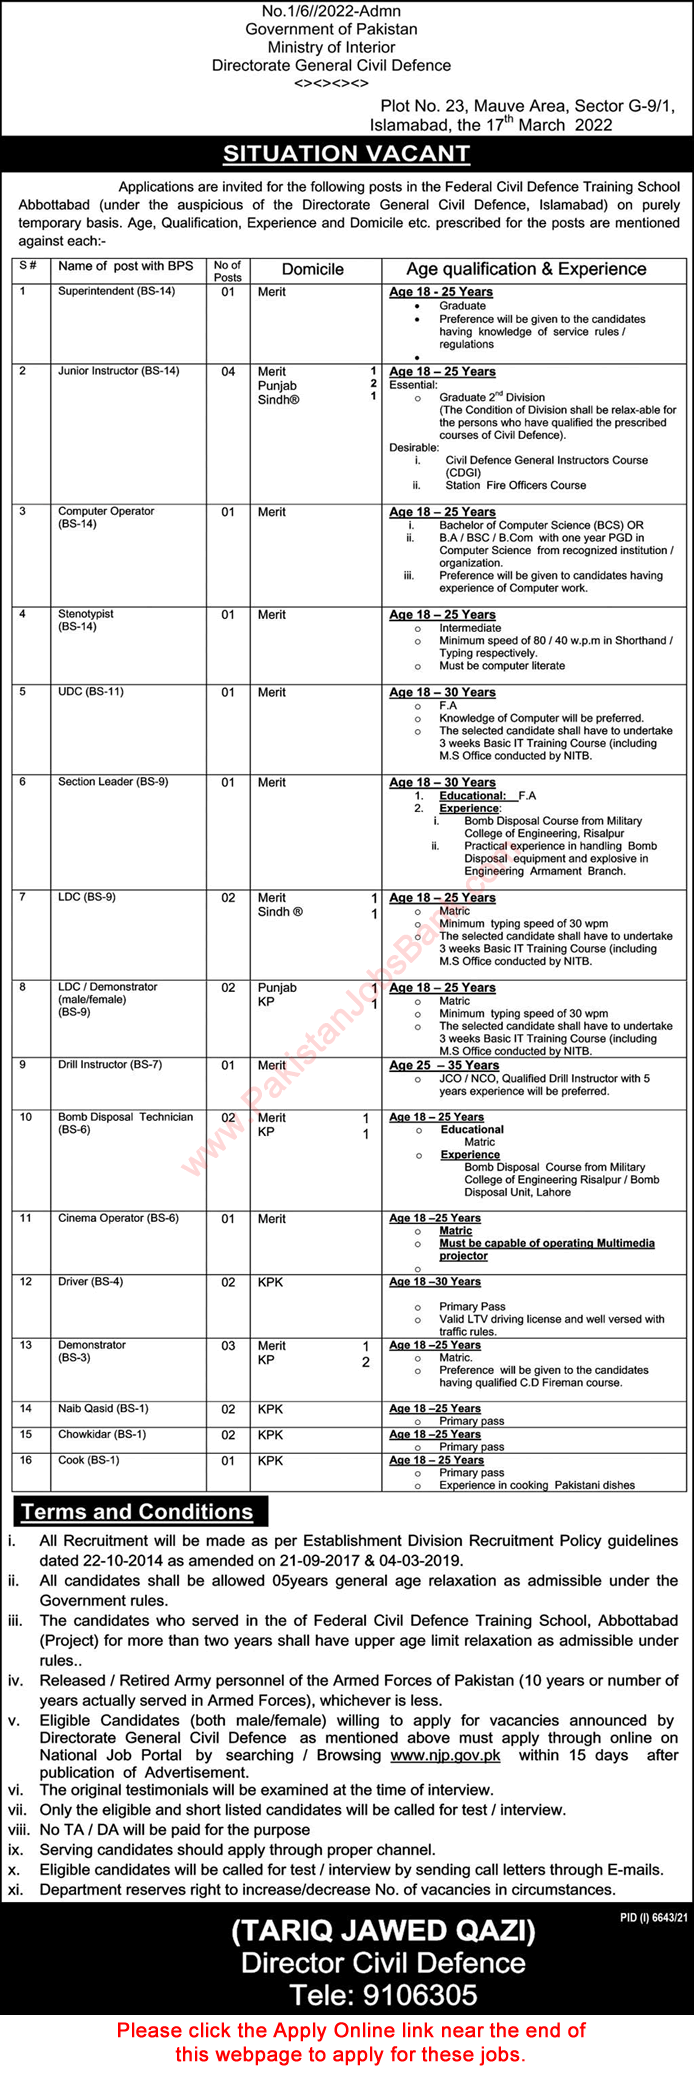 Directorate General Civil Defence Jobs 2022 March Apply Online Instructors, Clerks & Others Latest